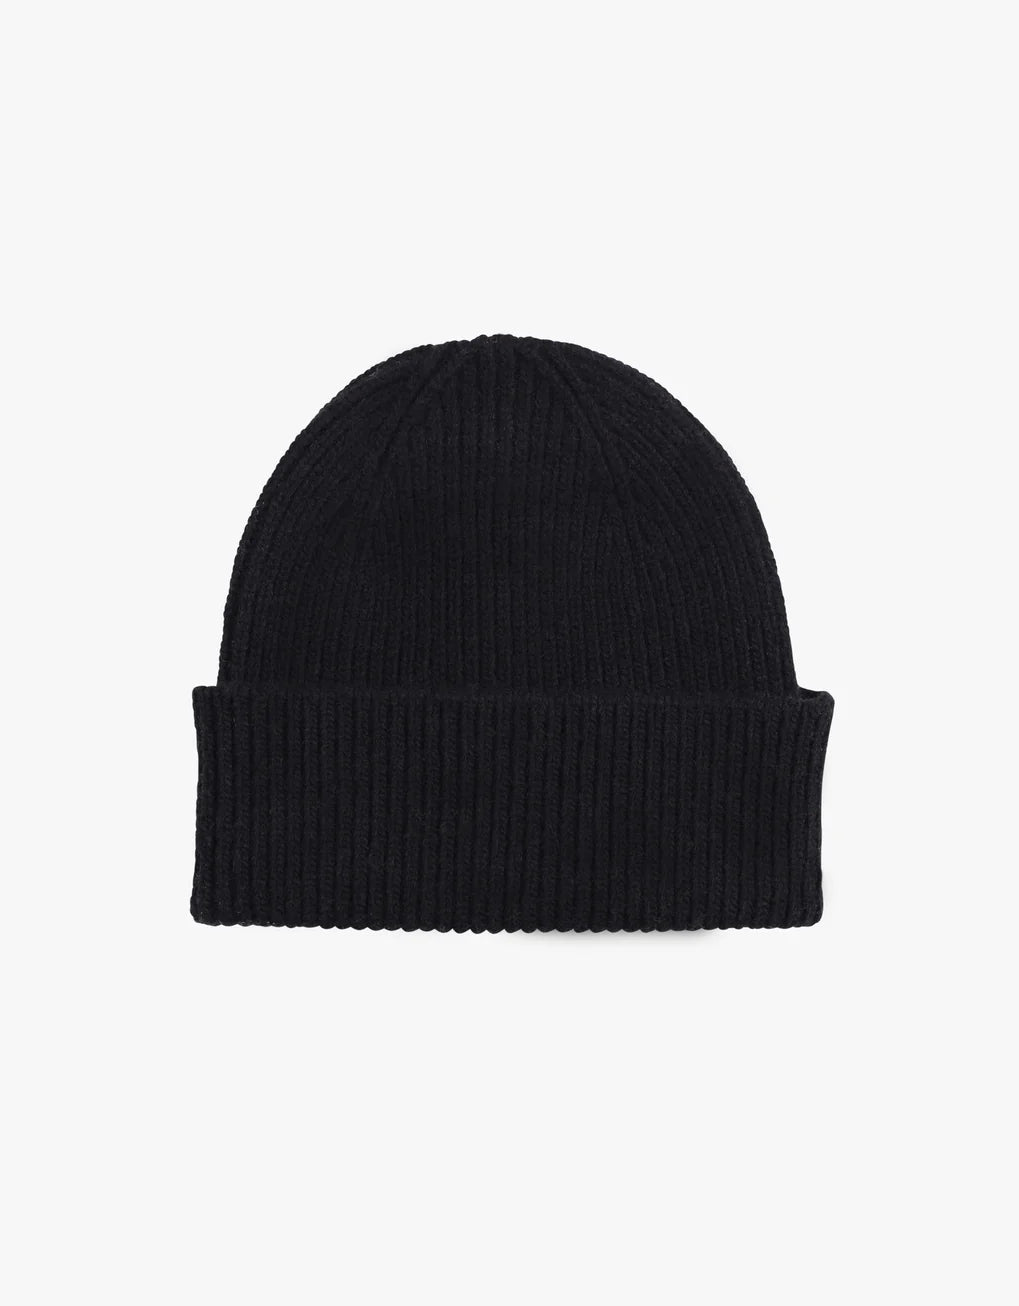 A Colorful Standard Merino Wool Beanie on a white background.